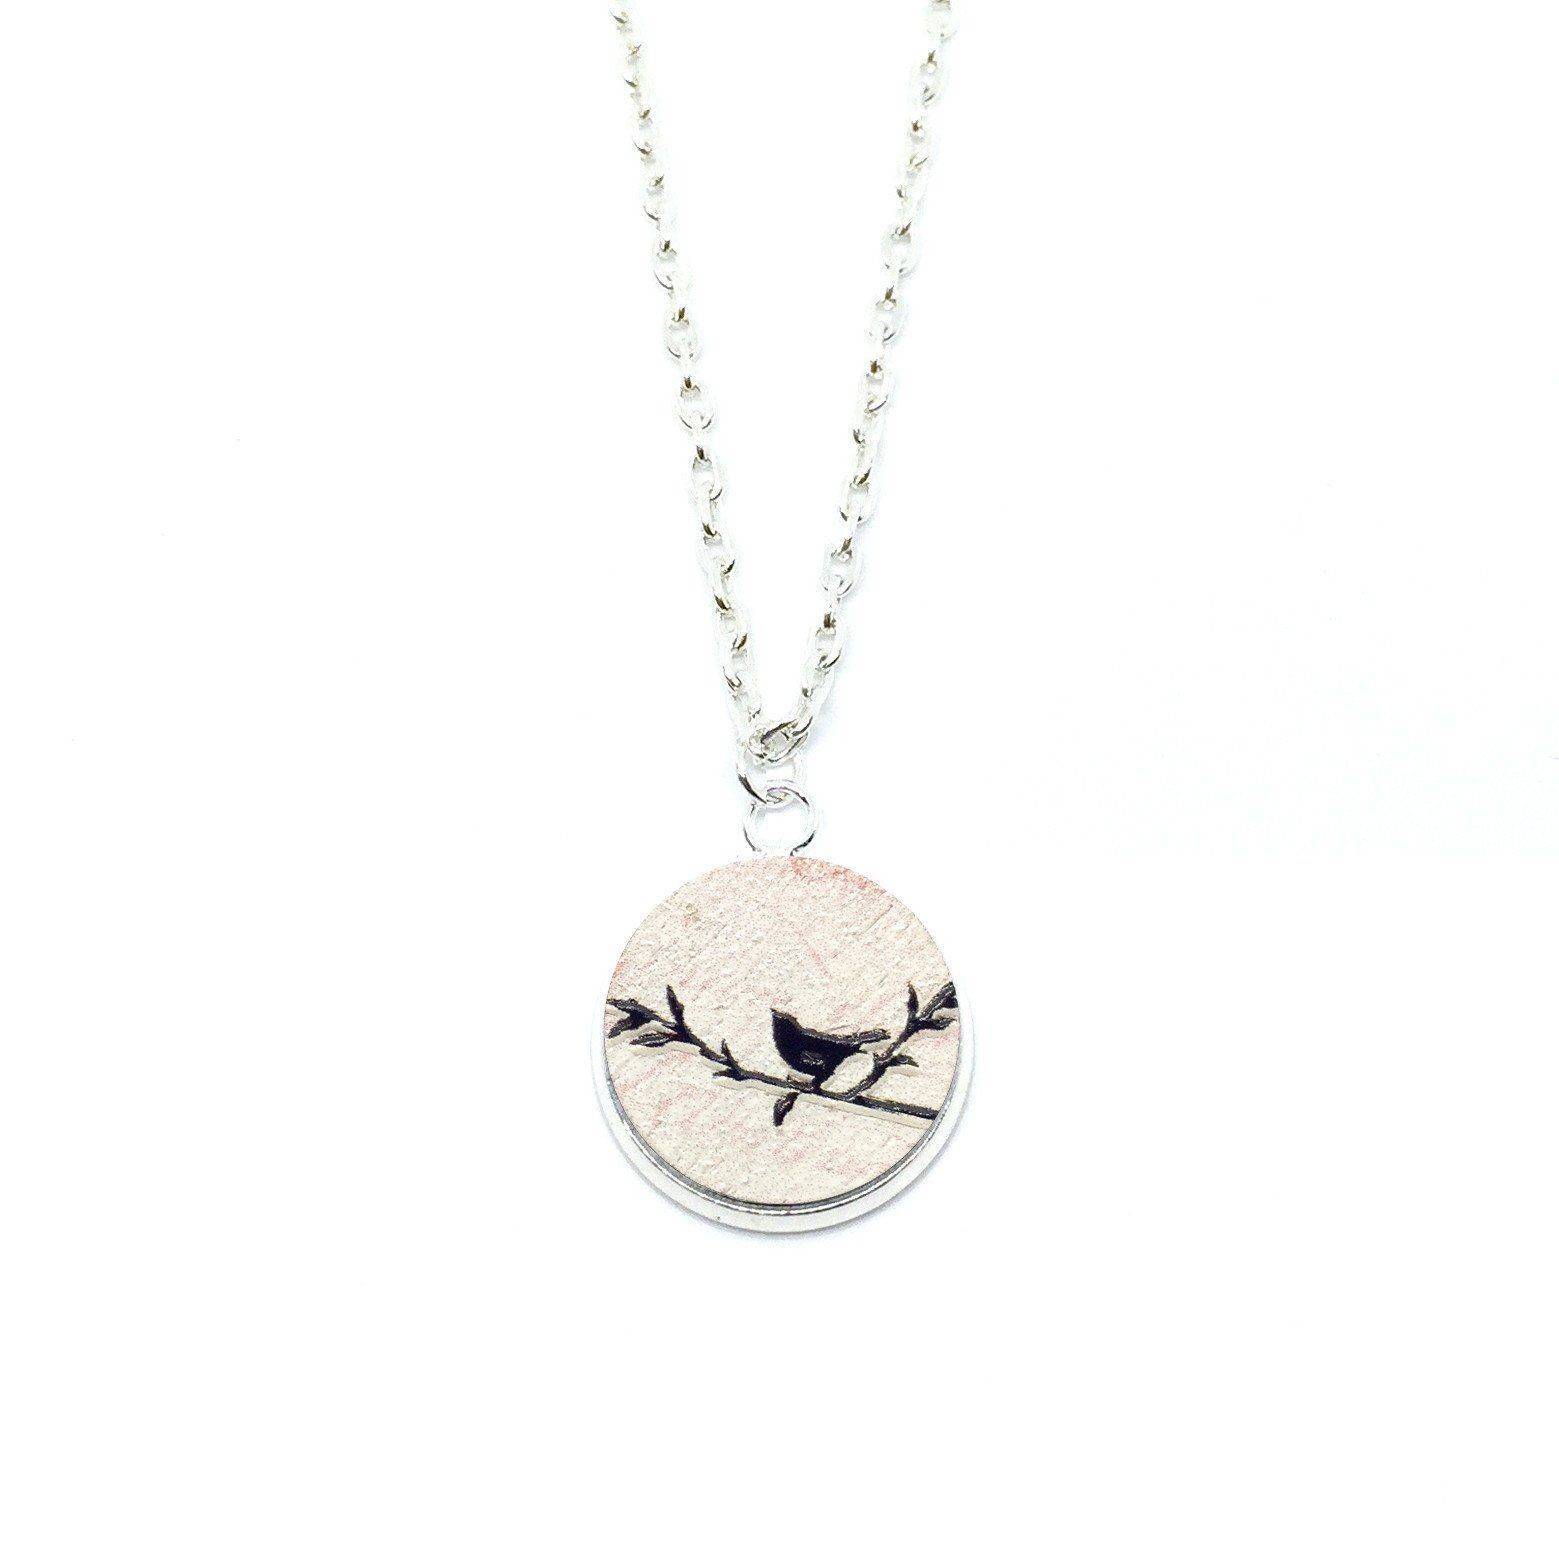 Vintage Love Birds Right Wood Pendant Necklace - Necklaces - Paperdaise Accessories - Naiise